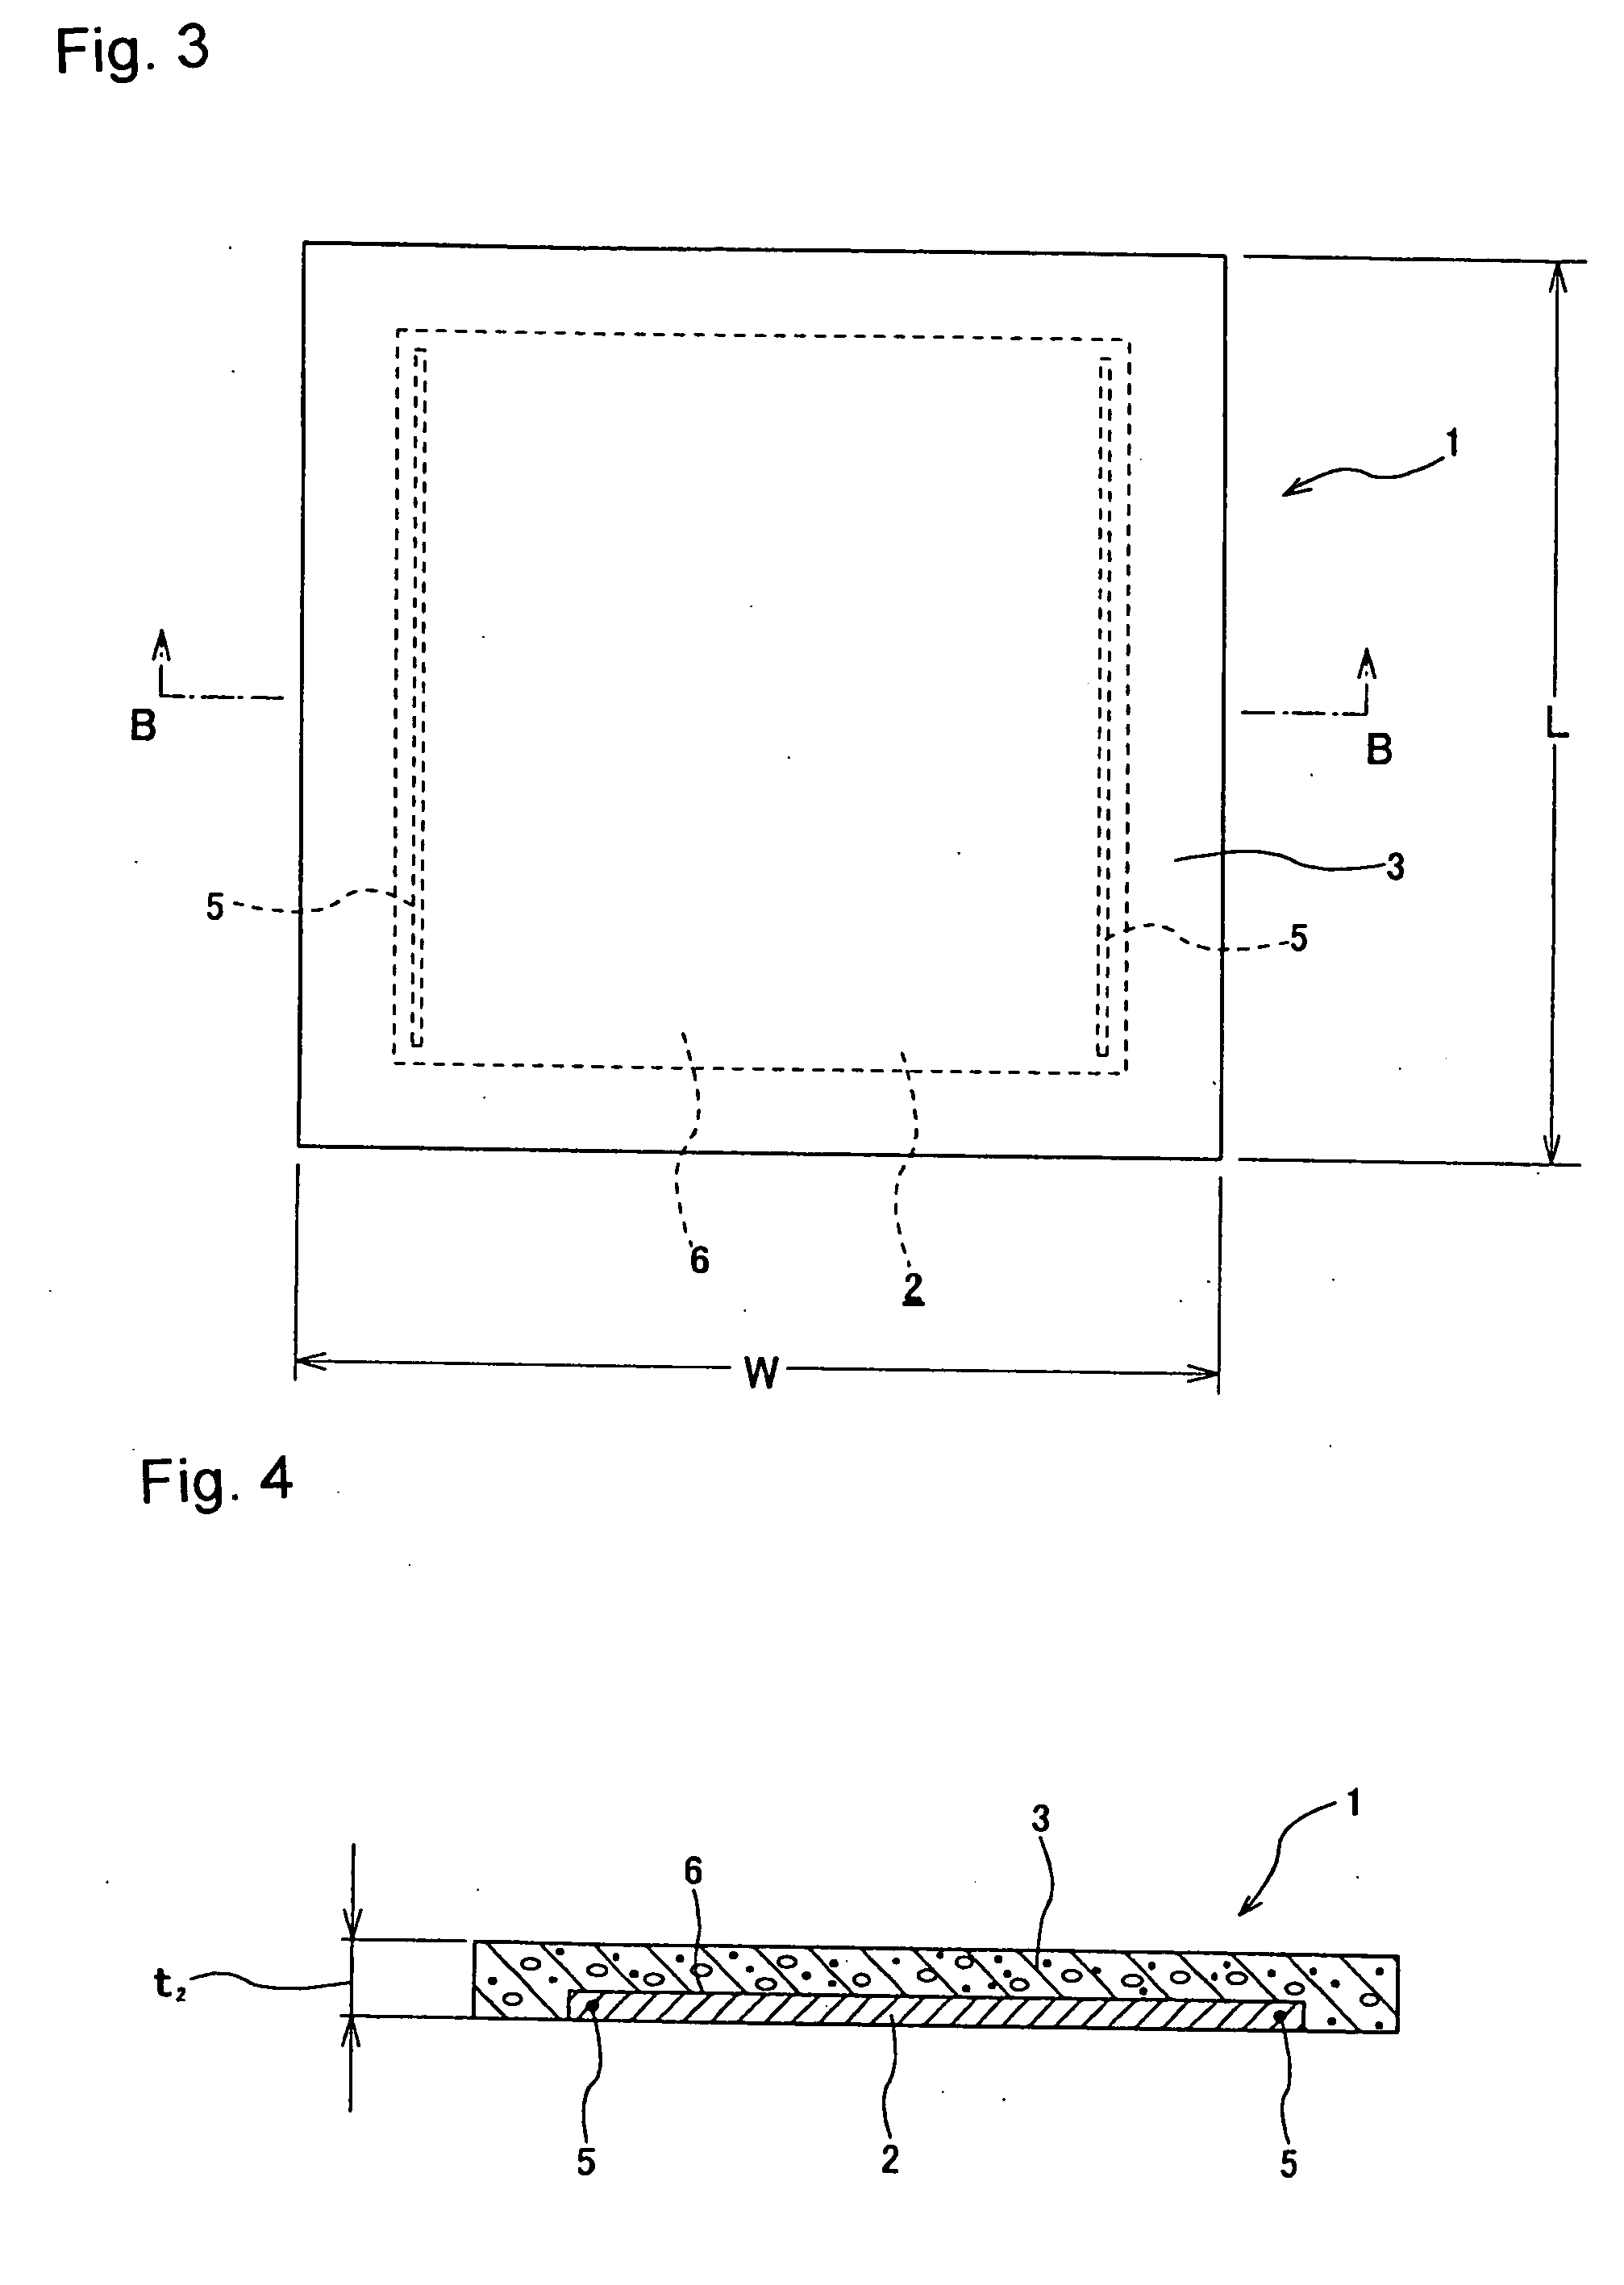 Heat-generating cement body, heat-generating cement tile and manufacturing method thereof